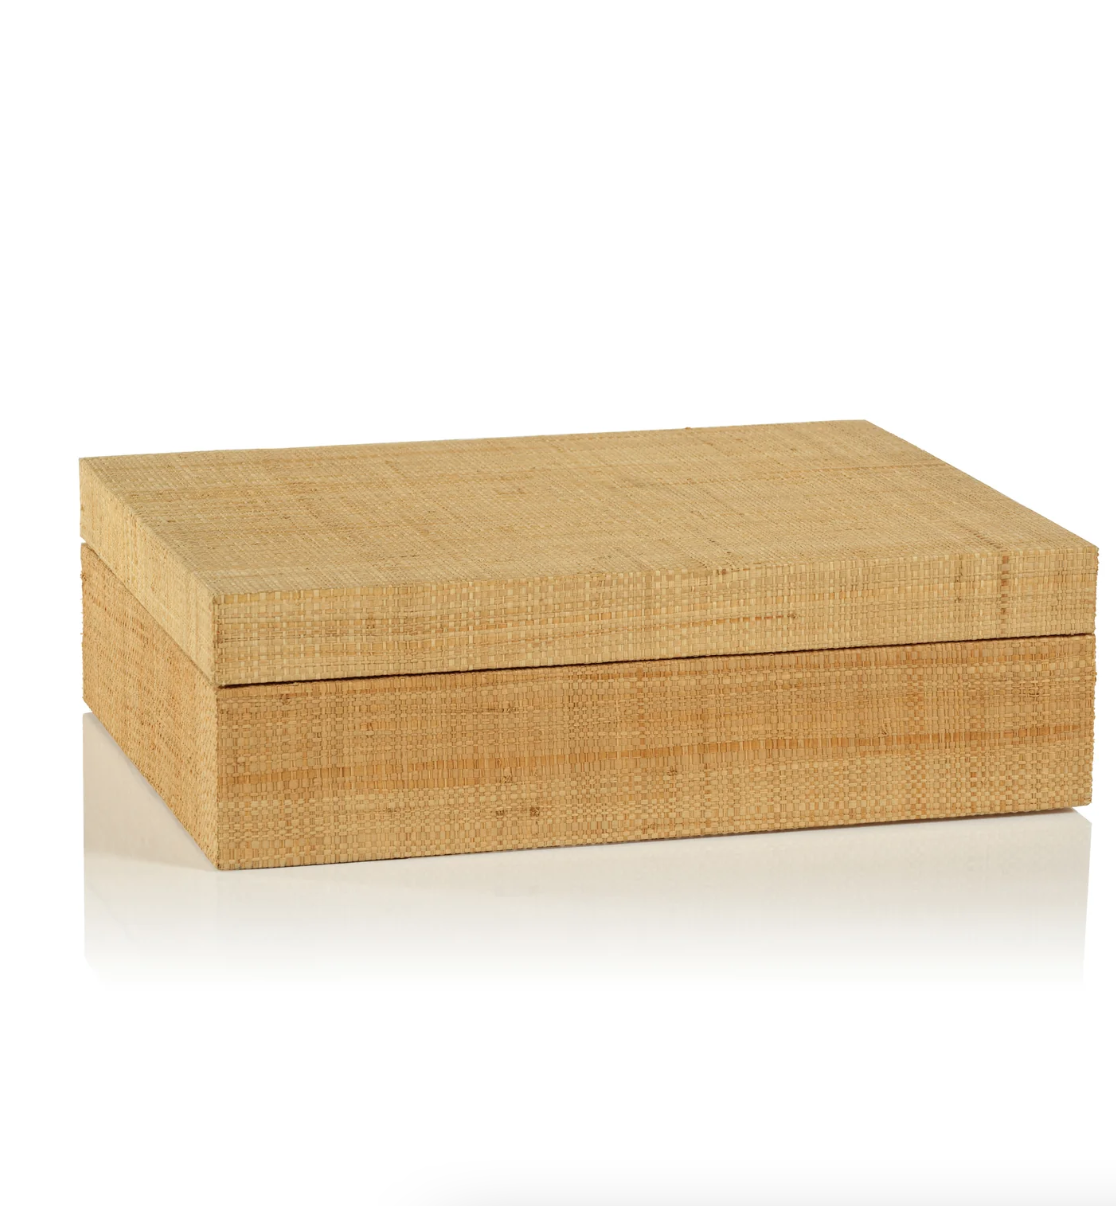 A rectangular Grasscloth Box Extra Large with a textured surface, typical of a Scottsdale Arizona bungalow style, presented on a white background. The box appears sturdy and simple in design, ideal for storage or decorative purposes. Brand name: Zodax